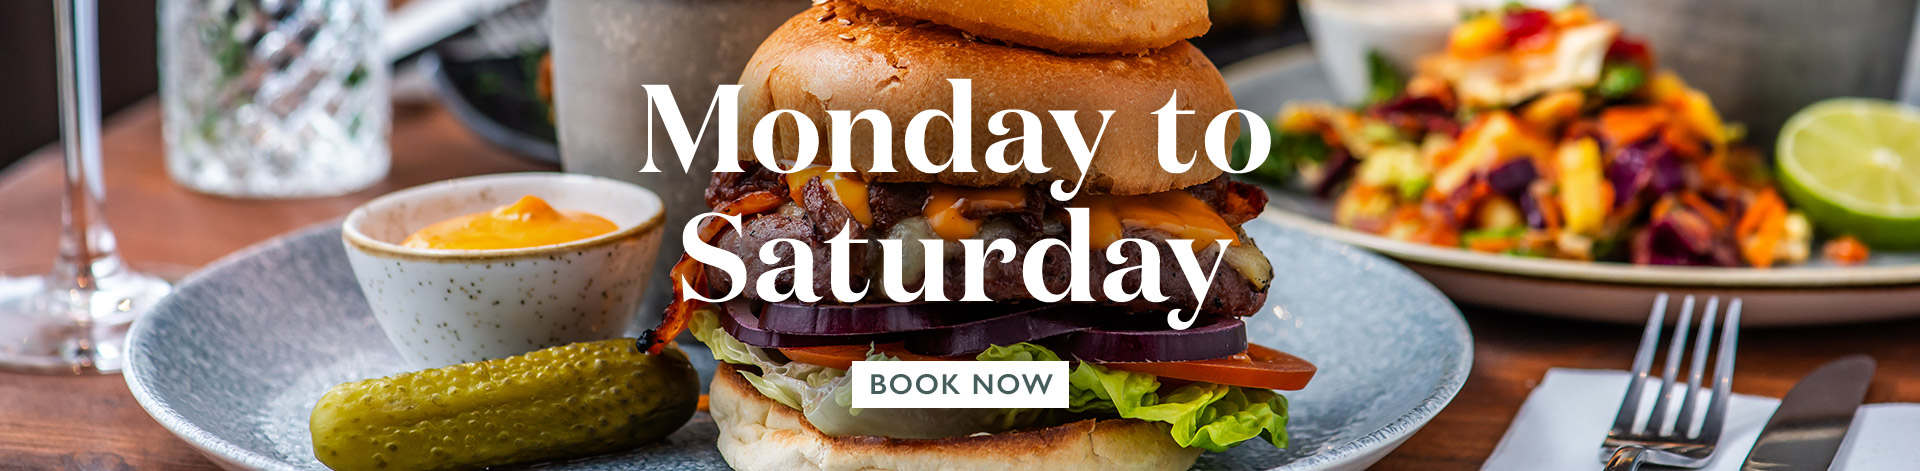 Book now at The Harrow